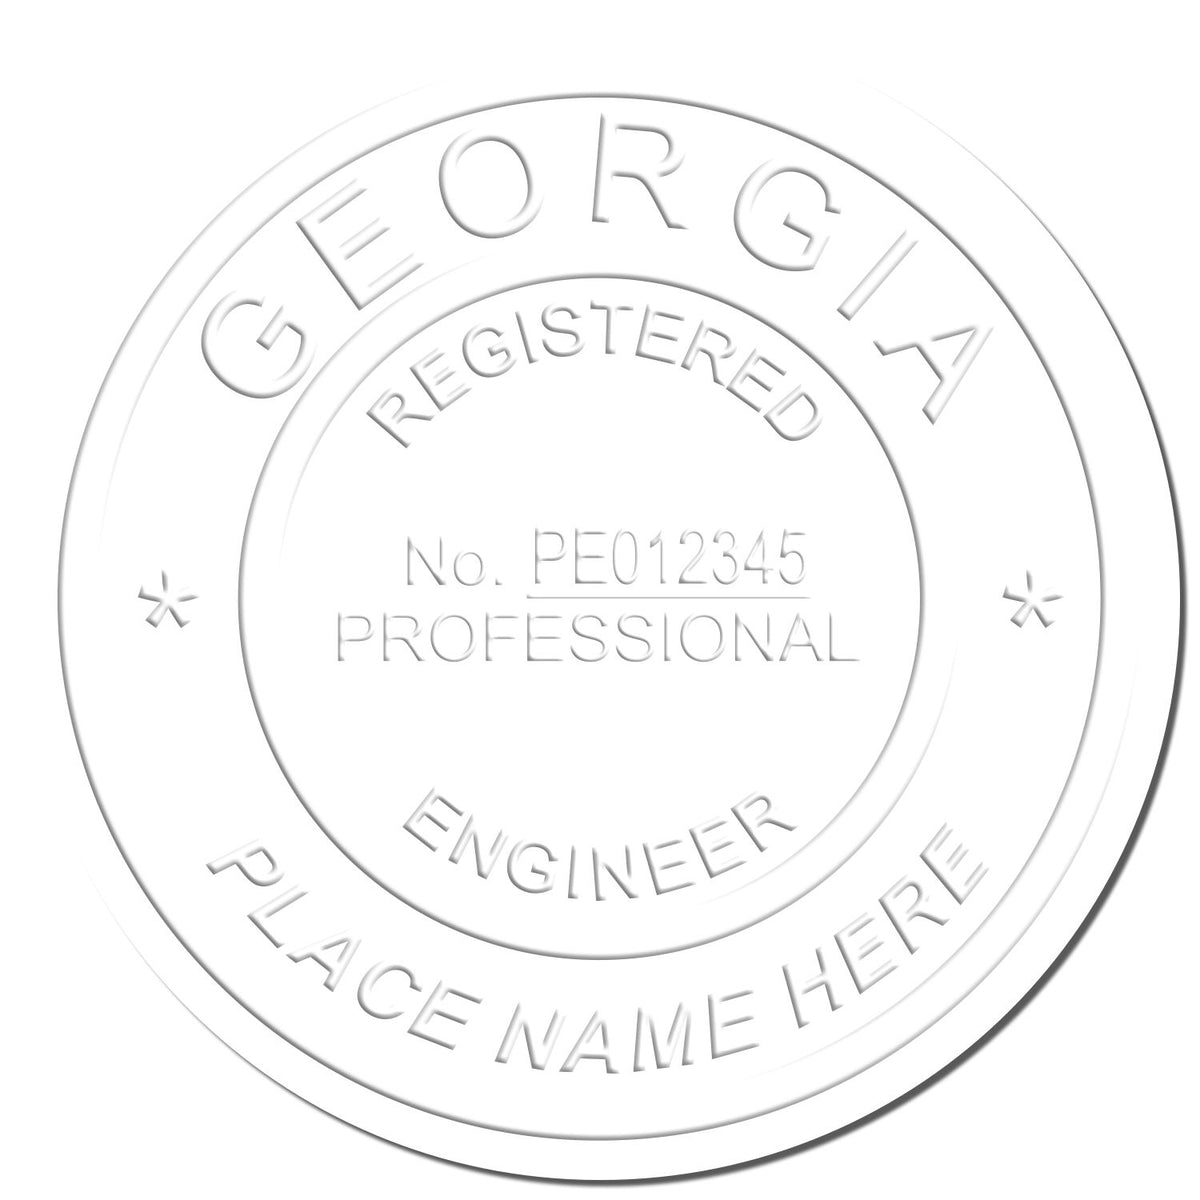 A photograph of the Handheld Georgia Professional Engineer Embosser stamp impression reveals a vivid, professional image of the on paper.